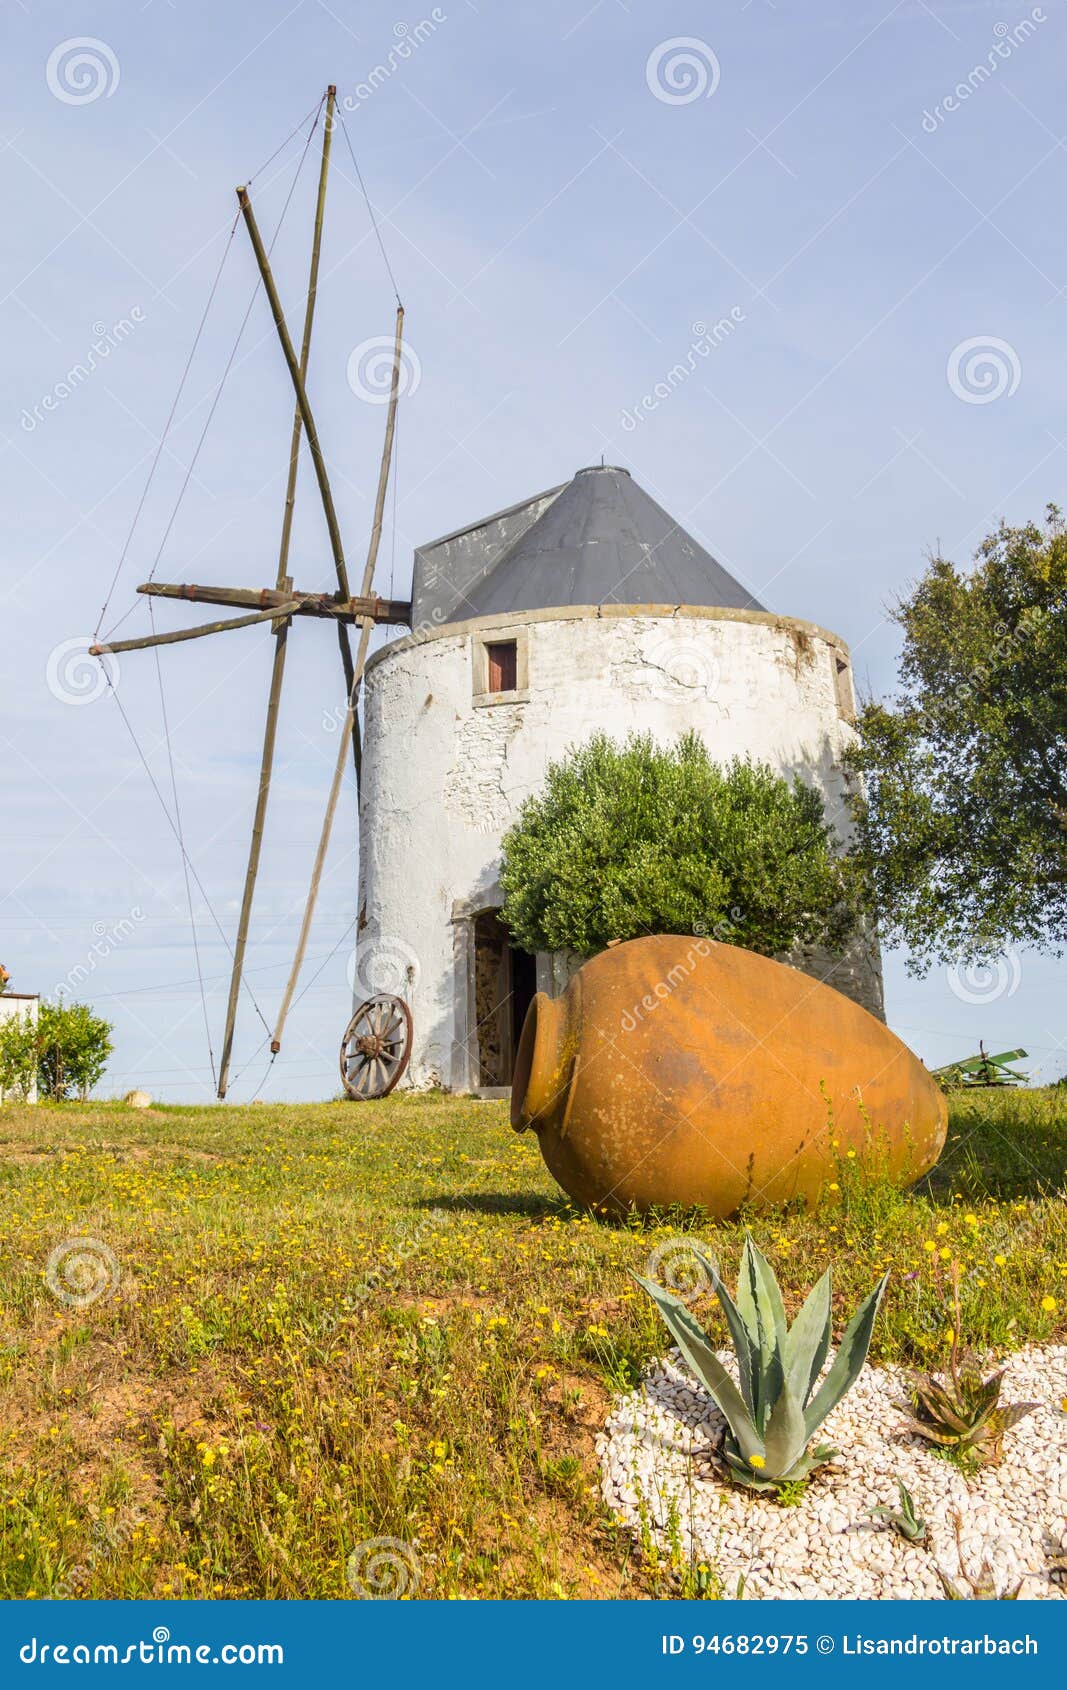 windmill in santiago do cacem